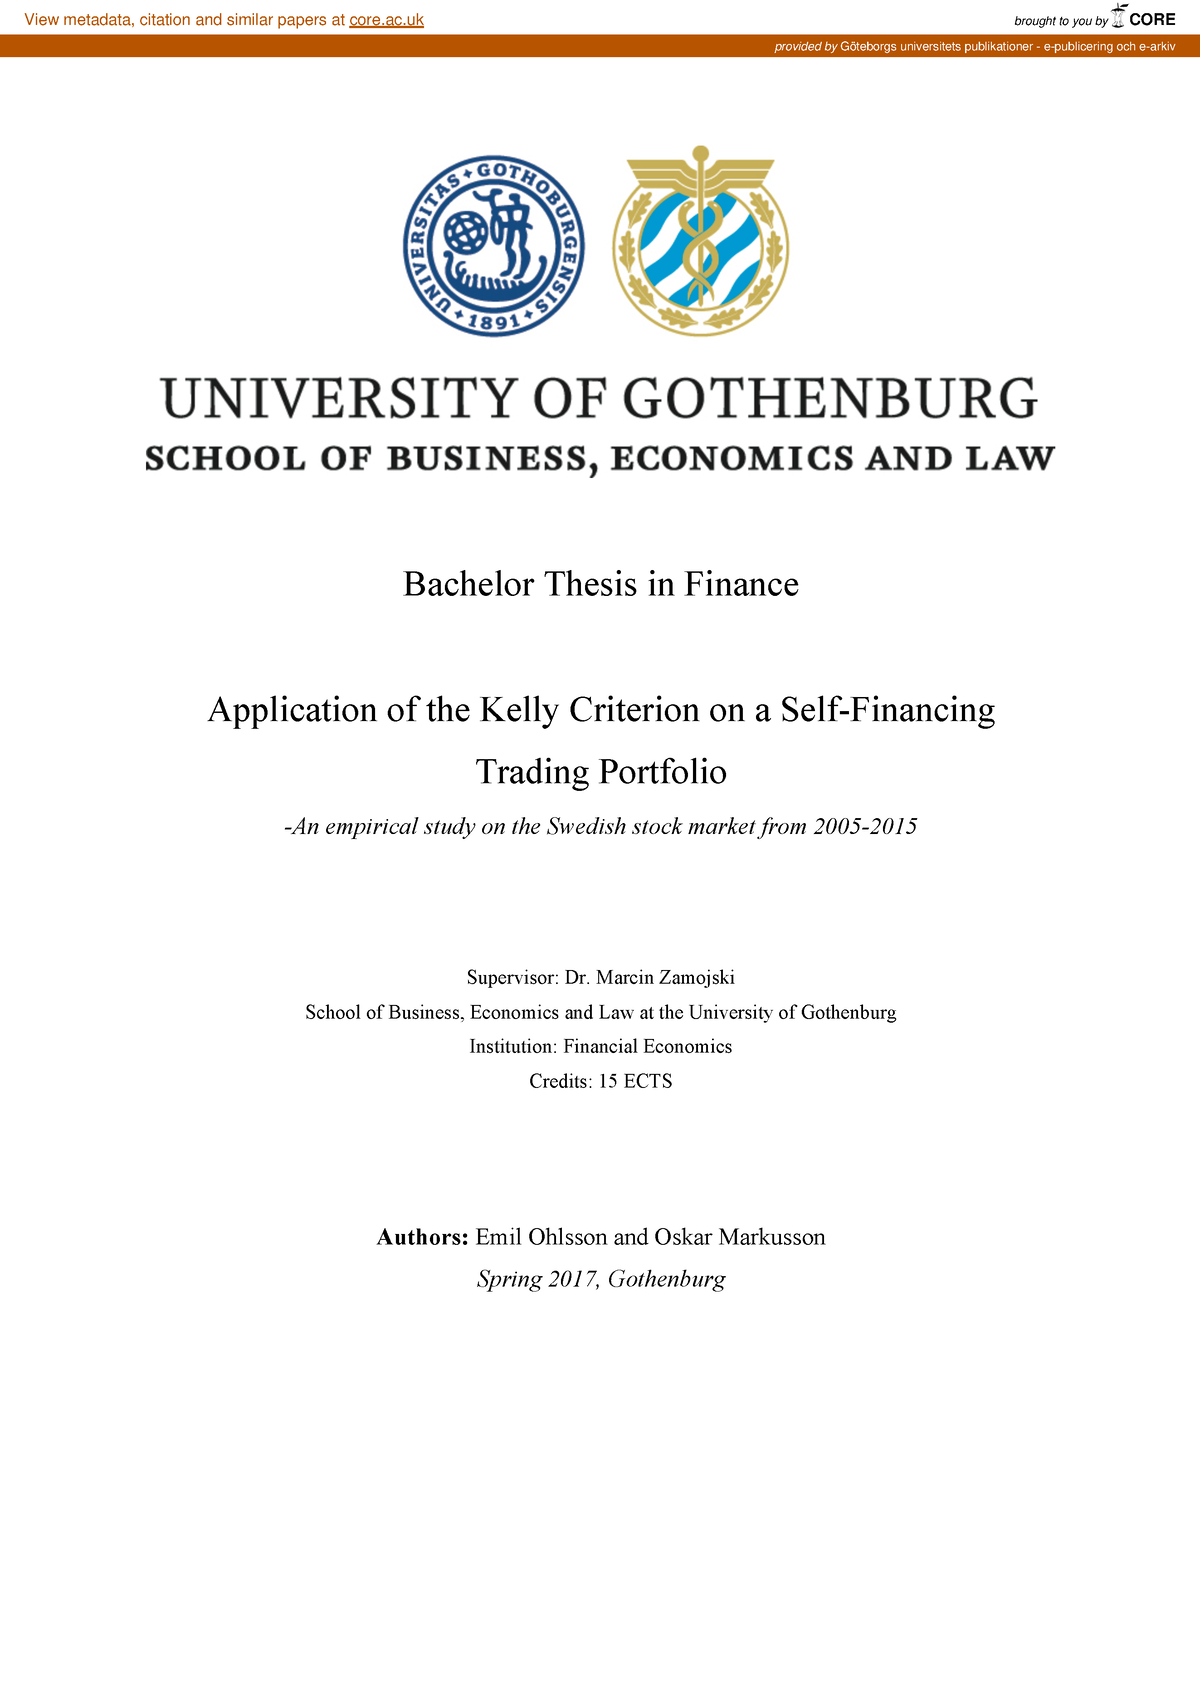 bachelor thesis in finance